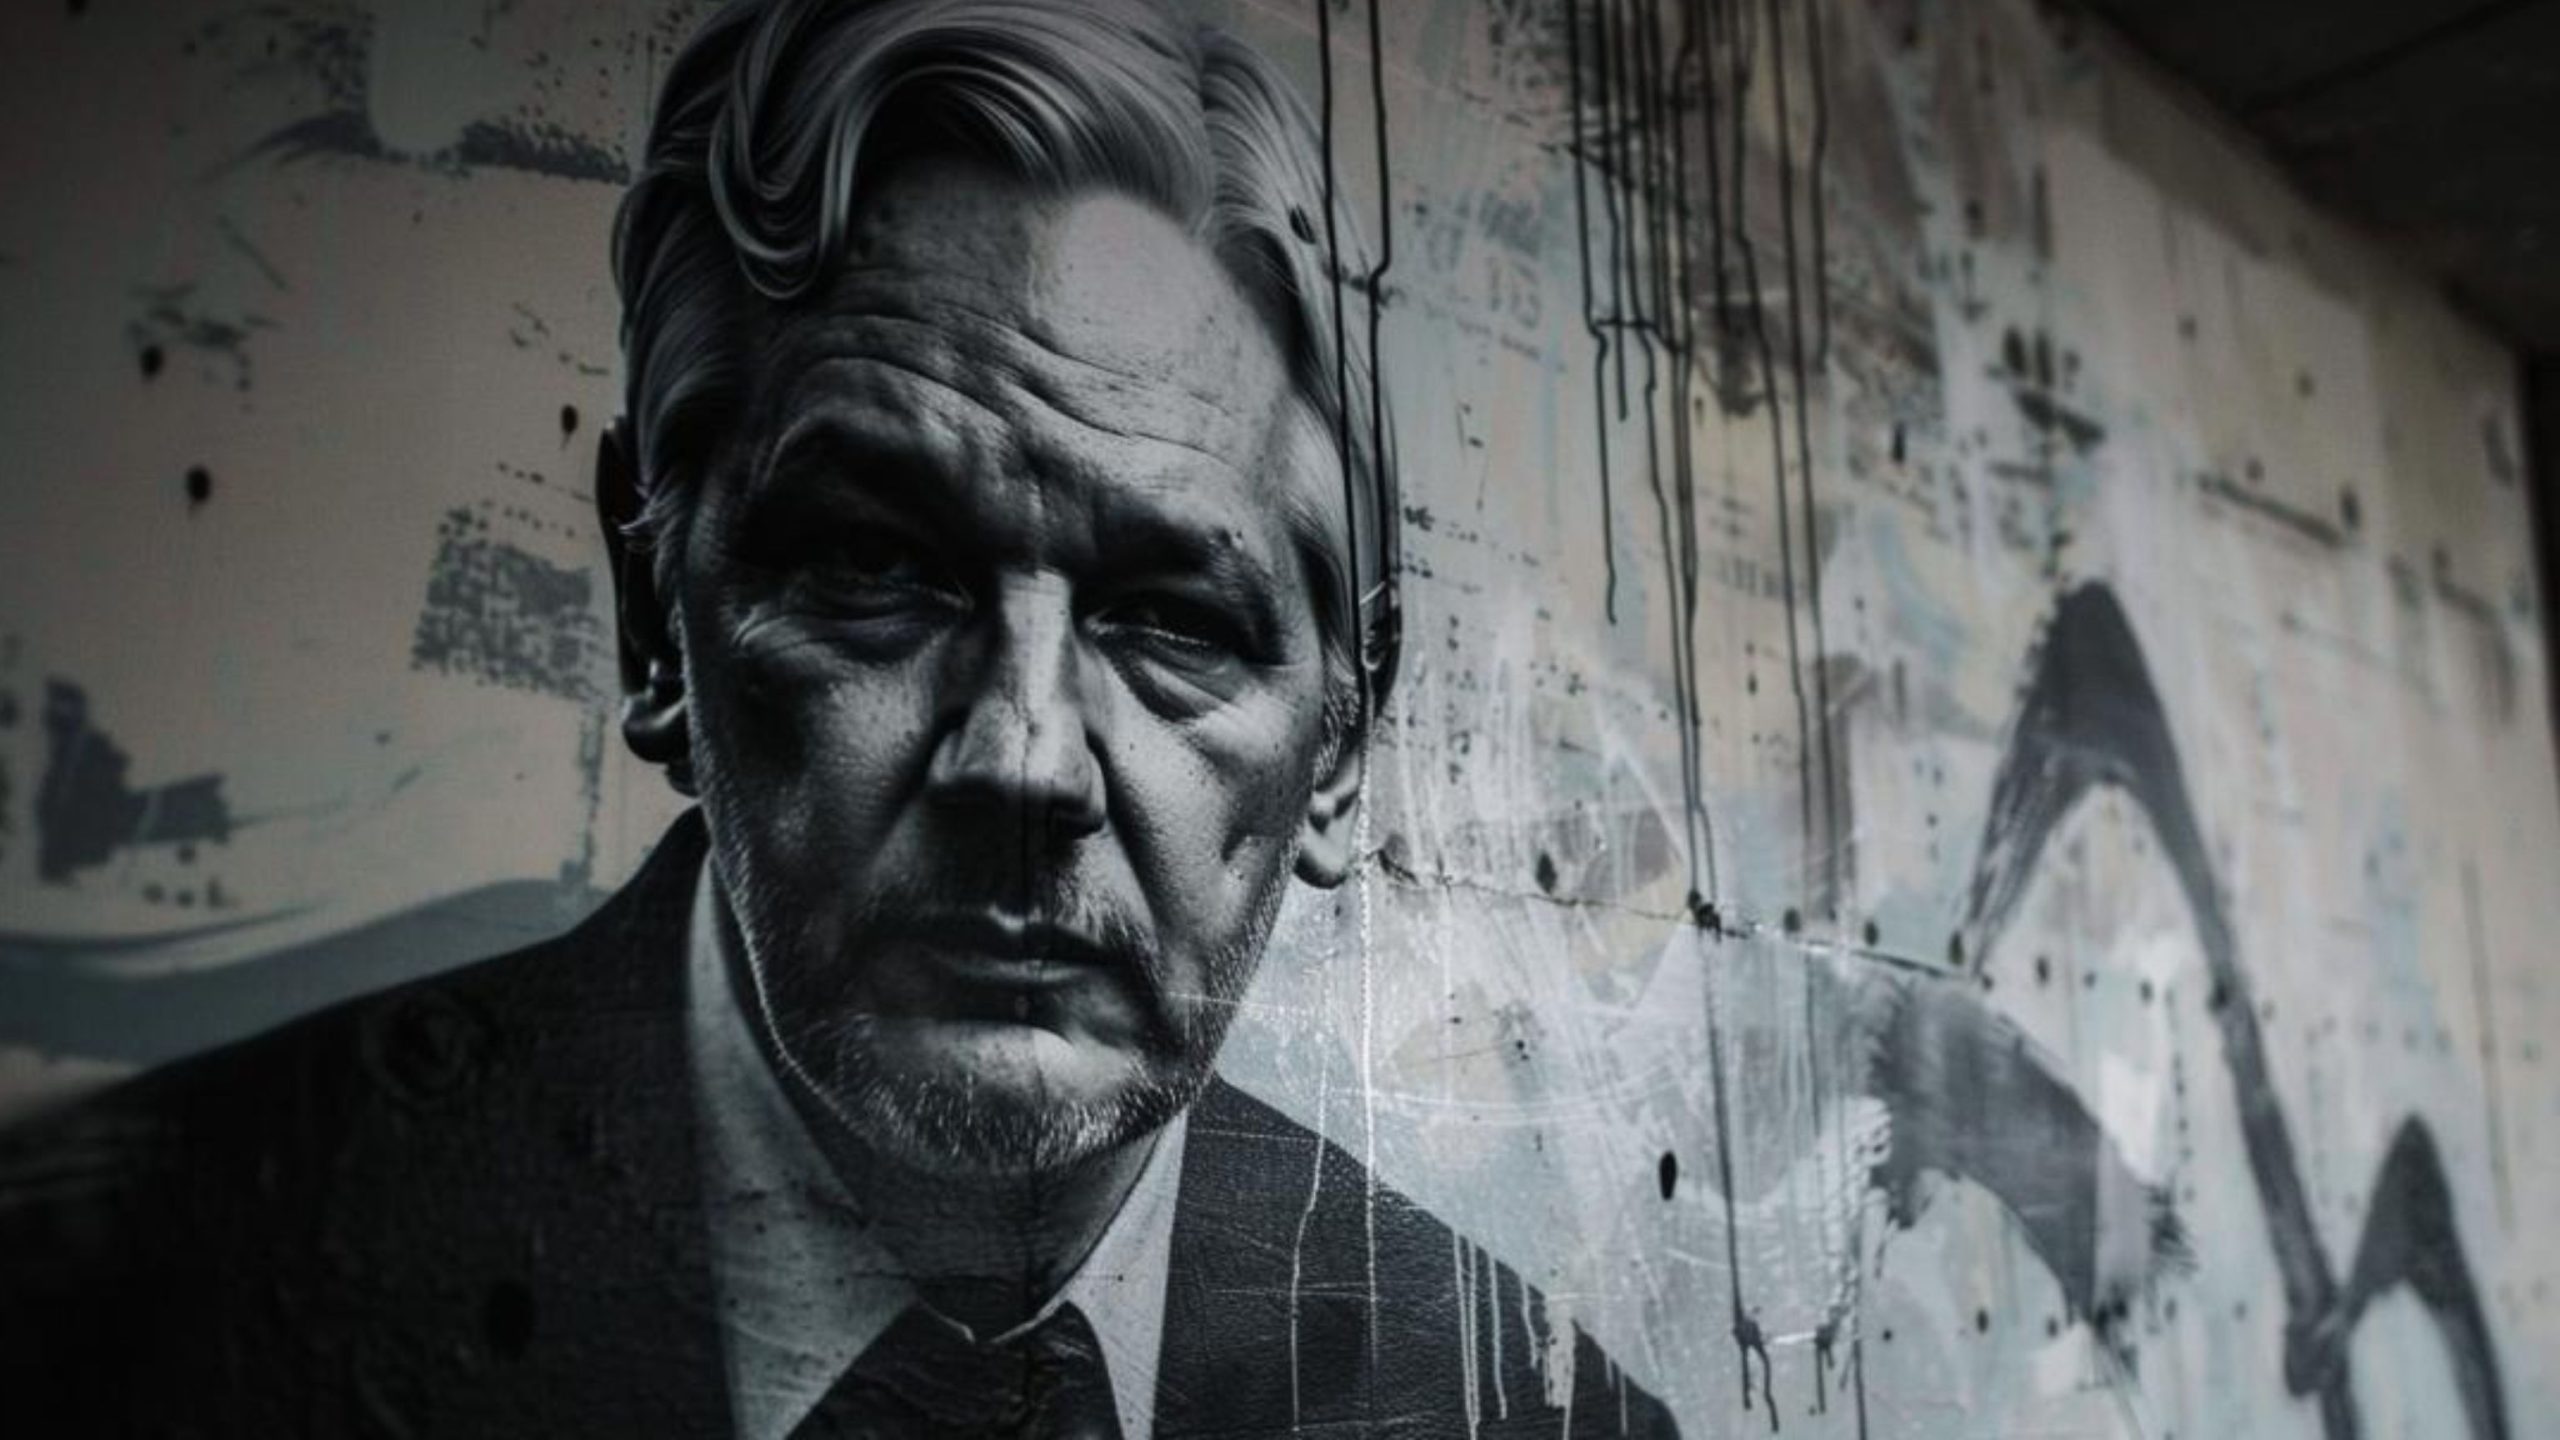 UK High Court Allows Assange to Challenge US Extradition